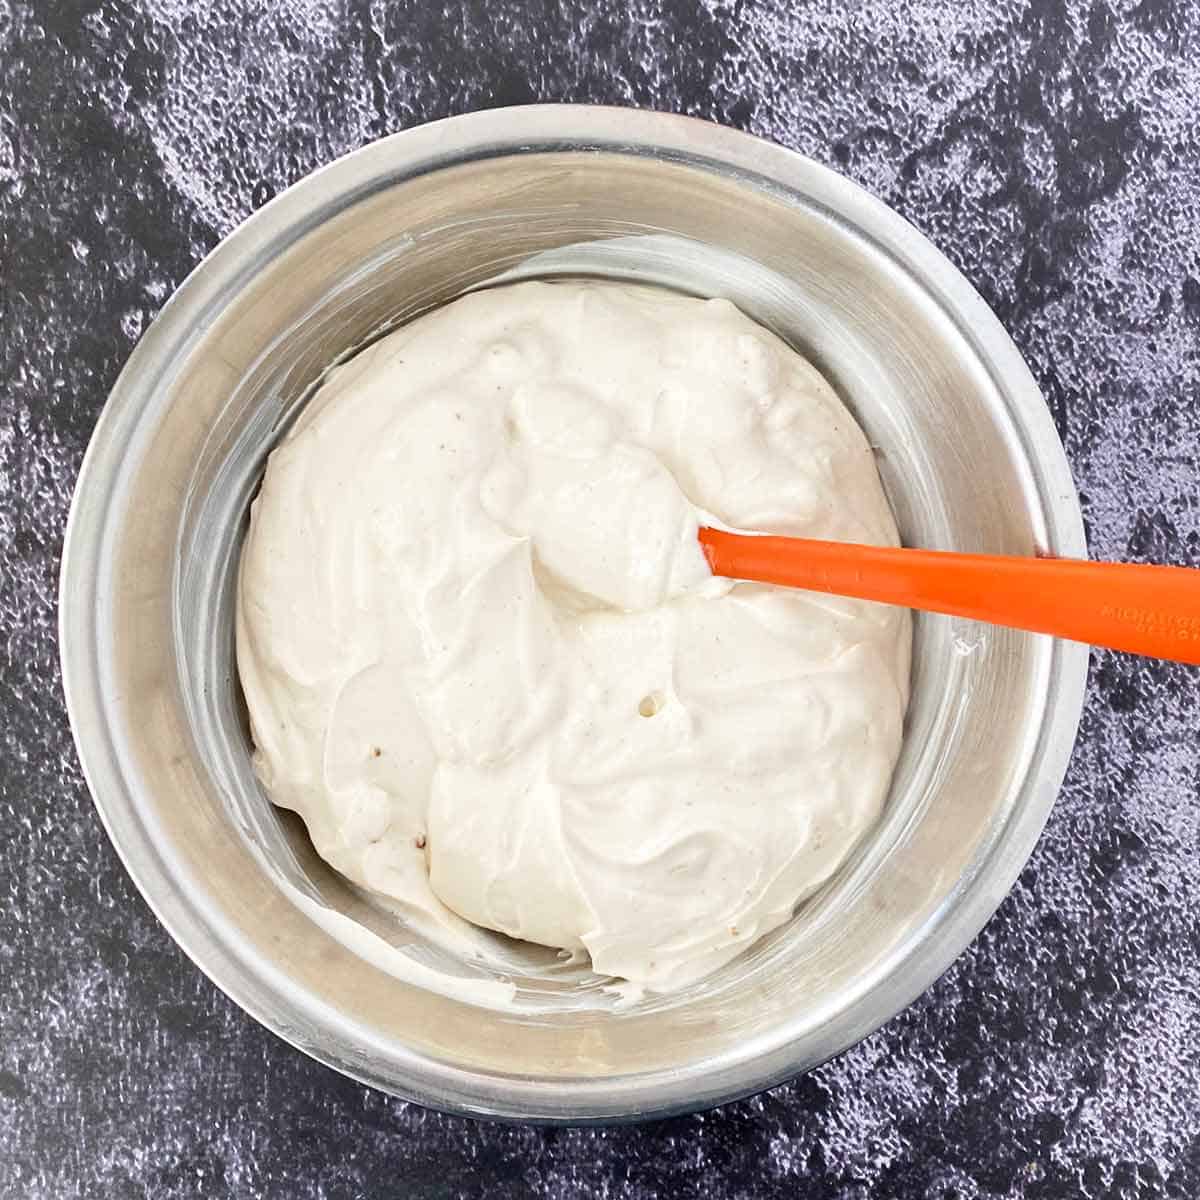 Combining the sour cream and horseradish sauce in a mixing bowl.